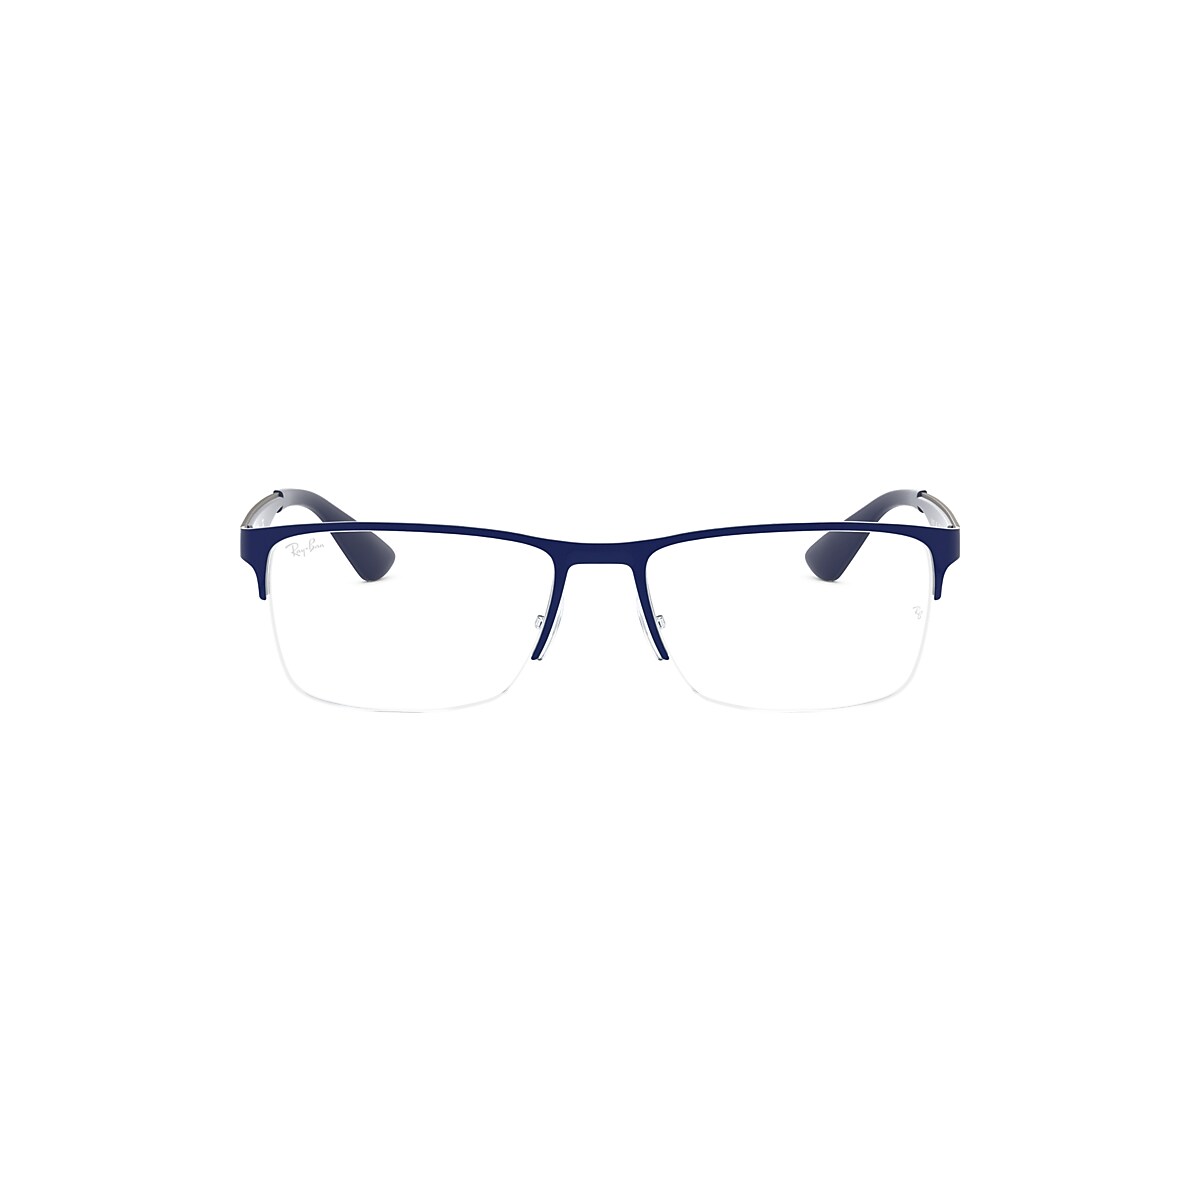 Sheet Unforeseen circumstances rescue Rb6335 Eyeglasses with Blue Frame | Ray-Ban®